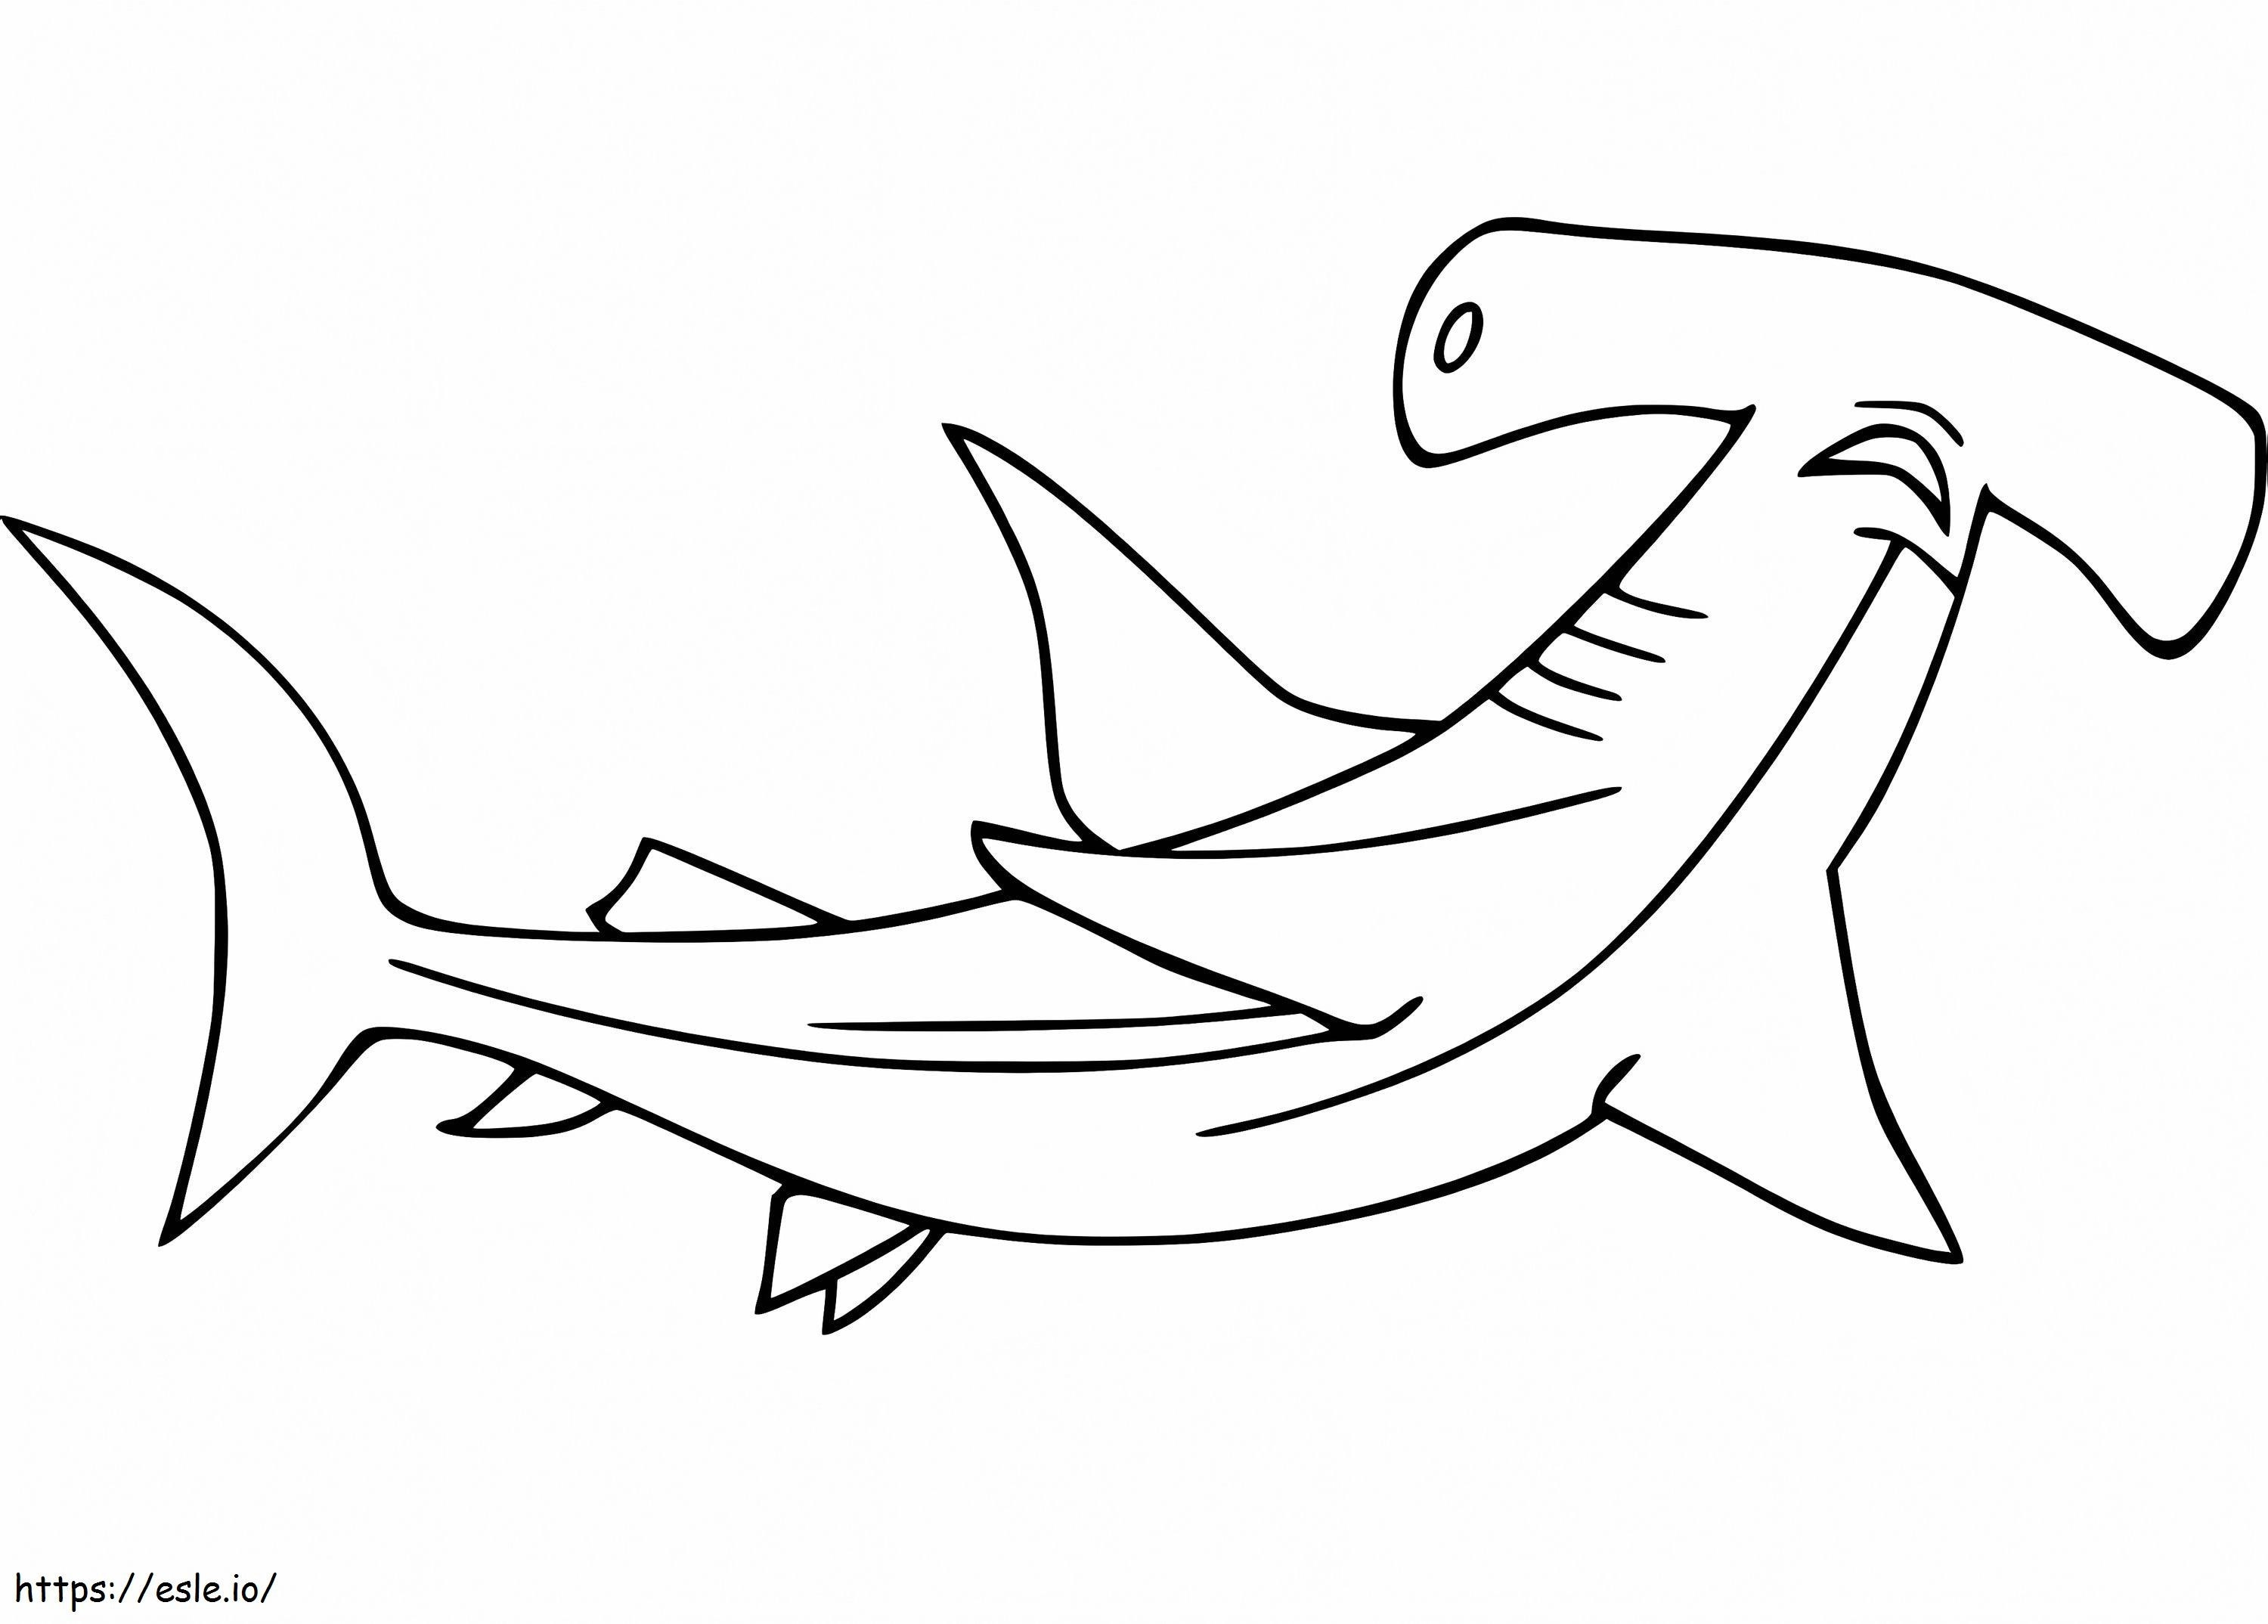 A Hammerhead Shark coloring page